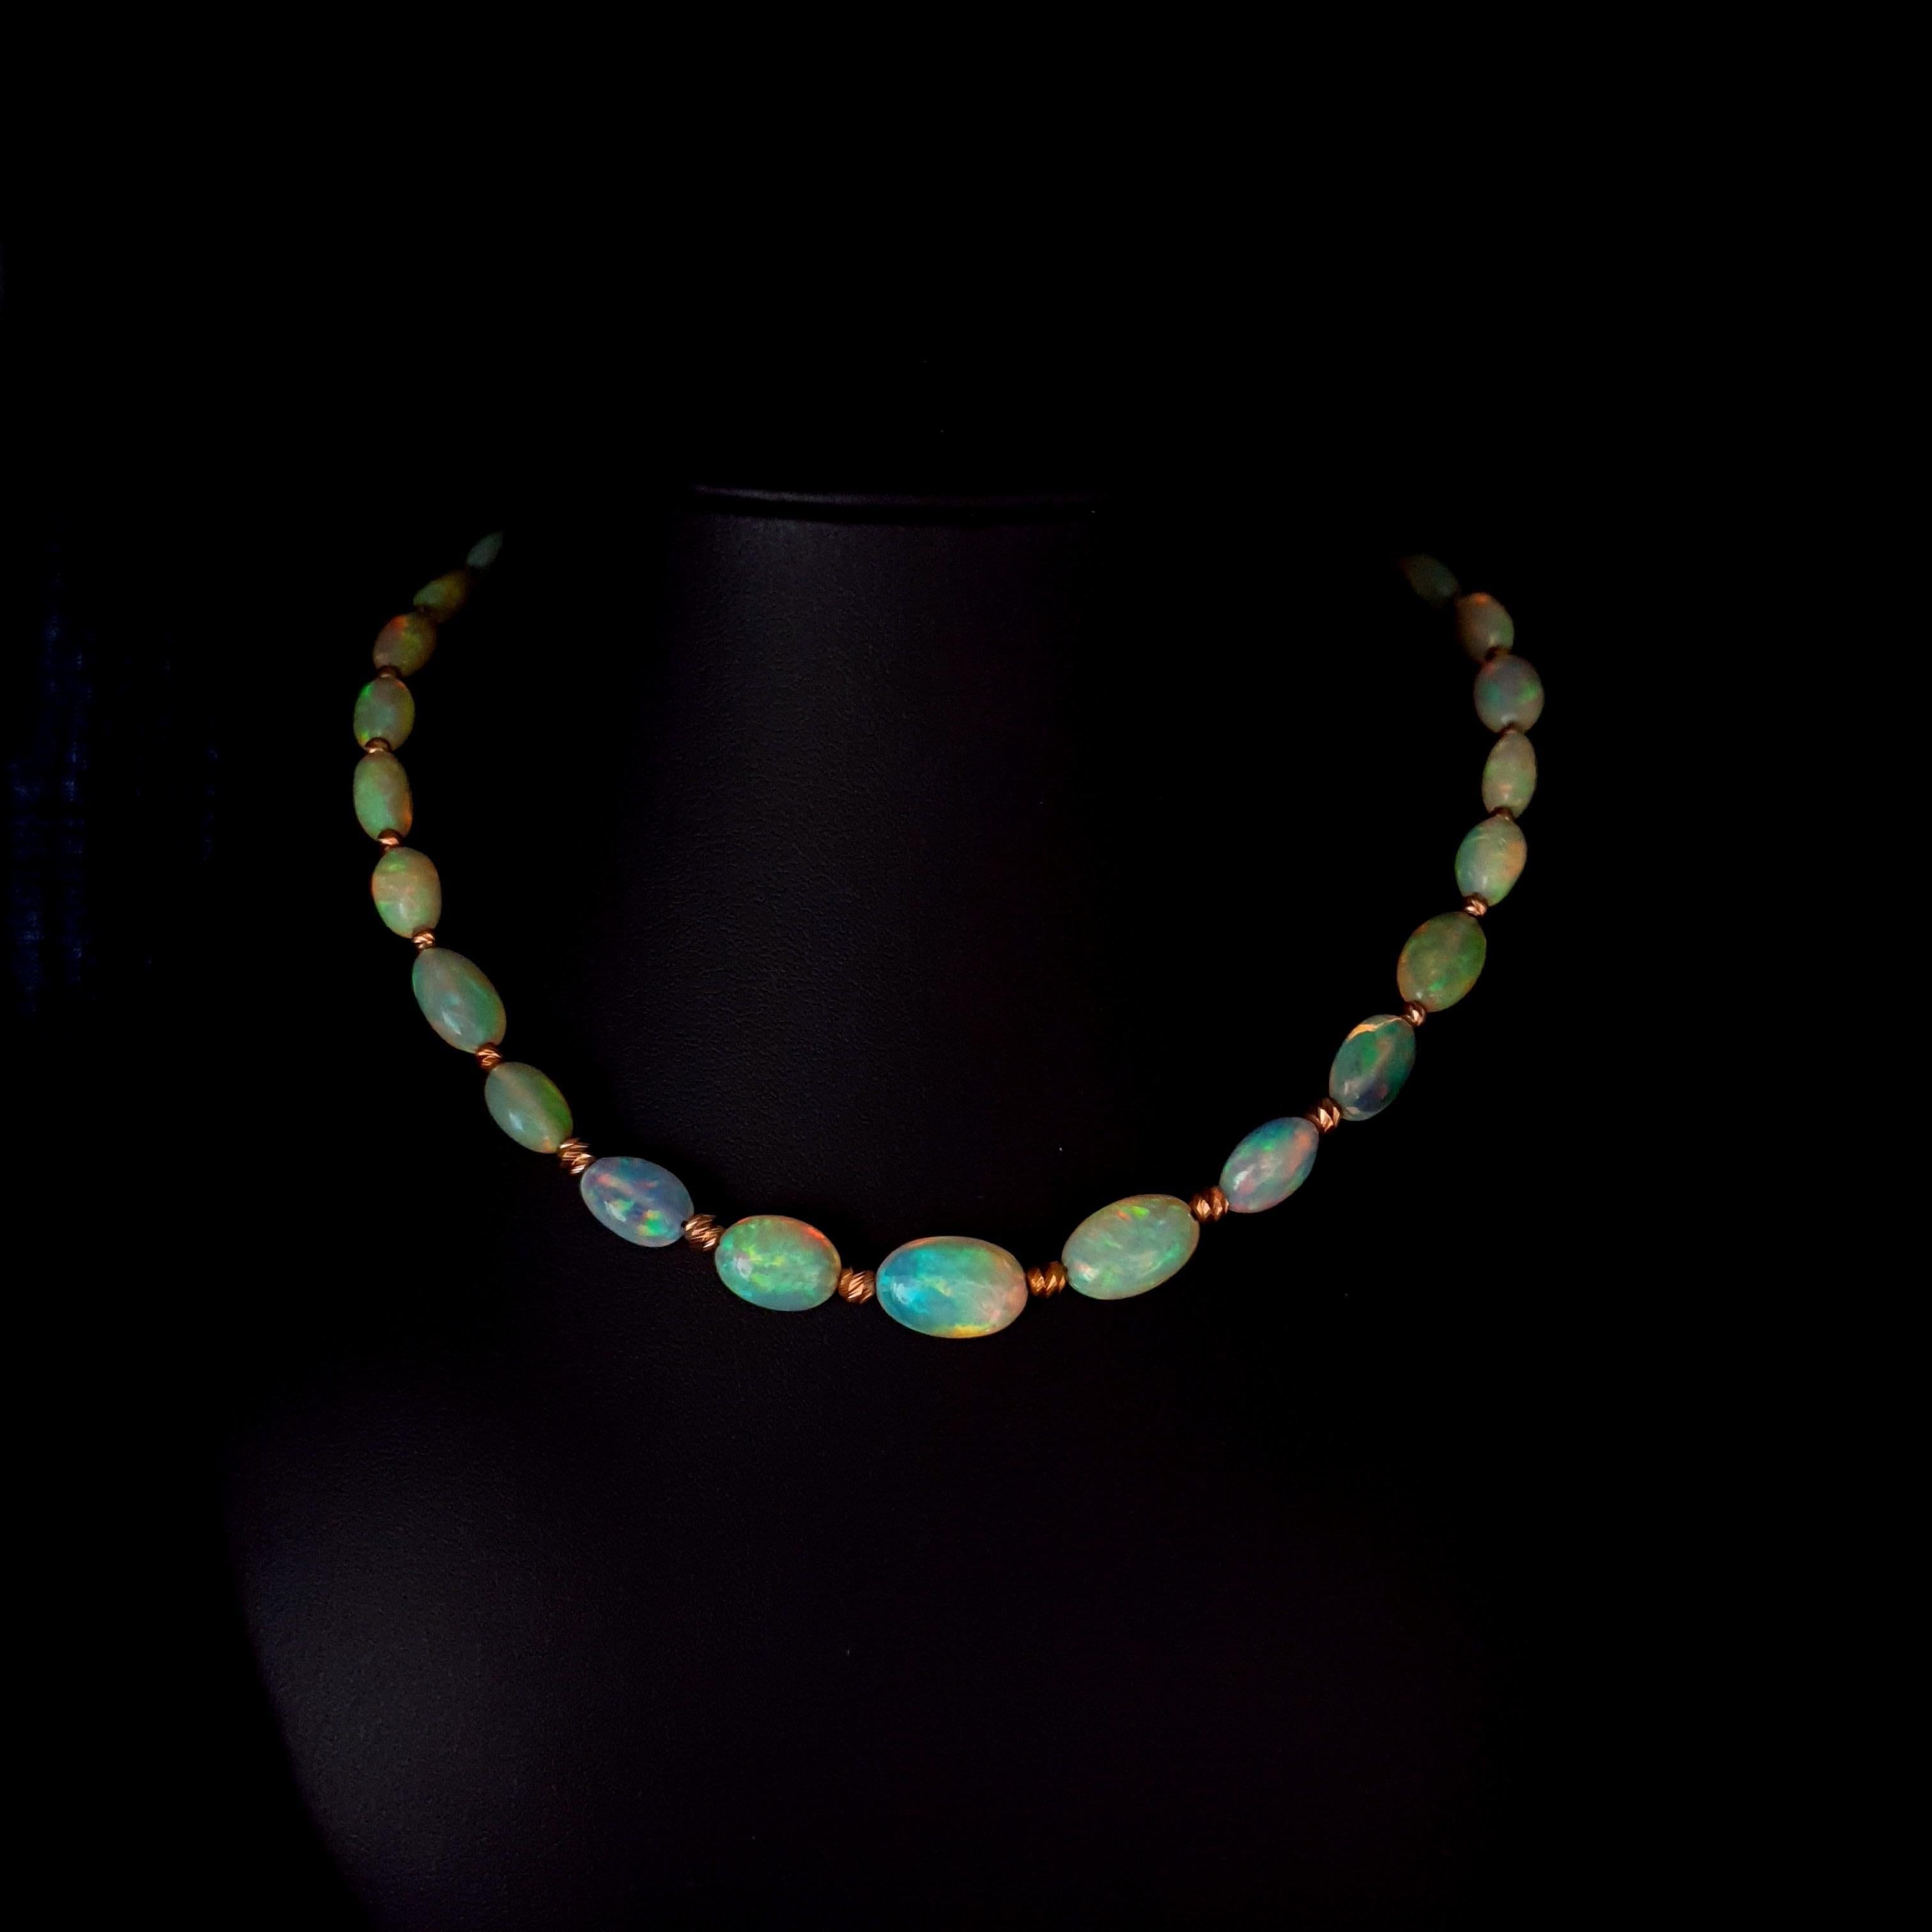 This Exceptional Crispy Sparkling Opal Baroque Necklace with 18 Carat Rose Gold is totally handmade. Cutting as well as goldwork are made in German quality. The screw clasp is easy to handle and very secure.
Timeless and classic design combined with